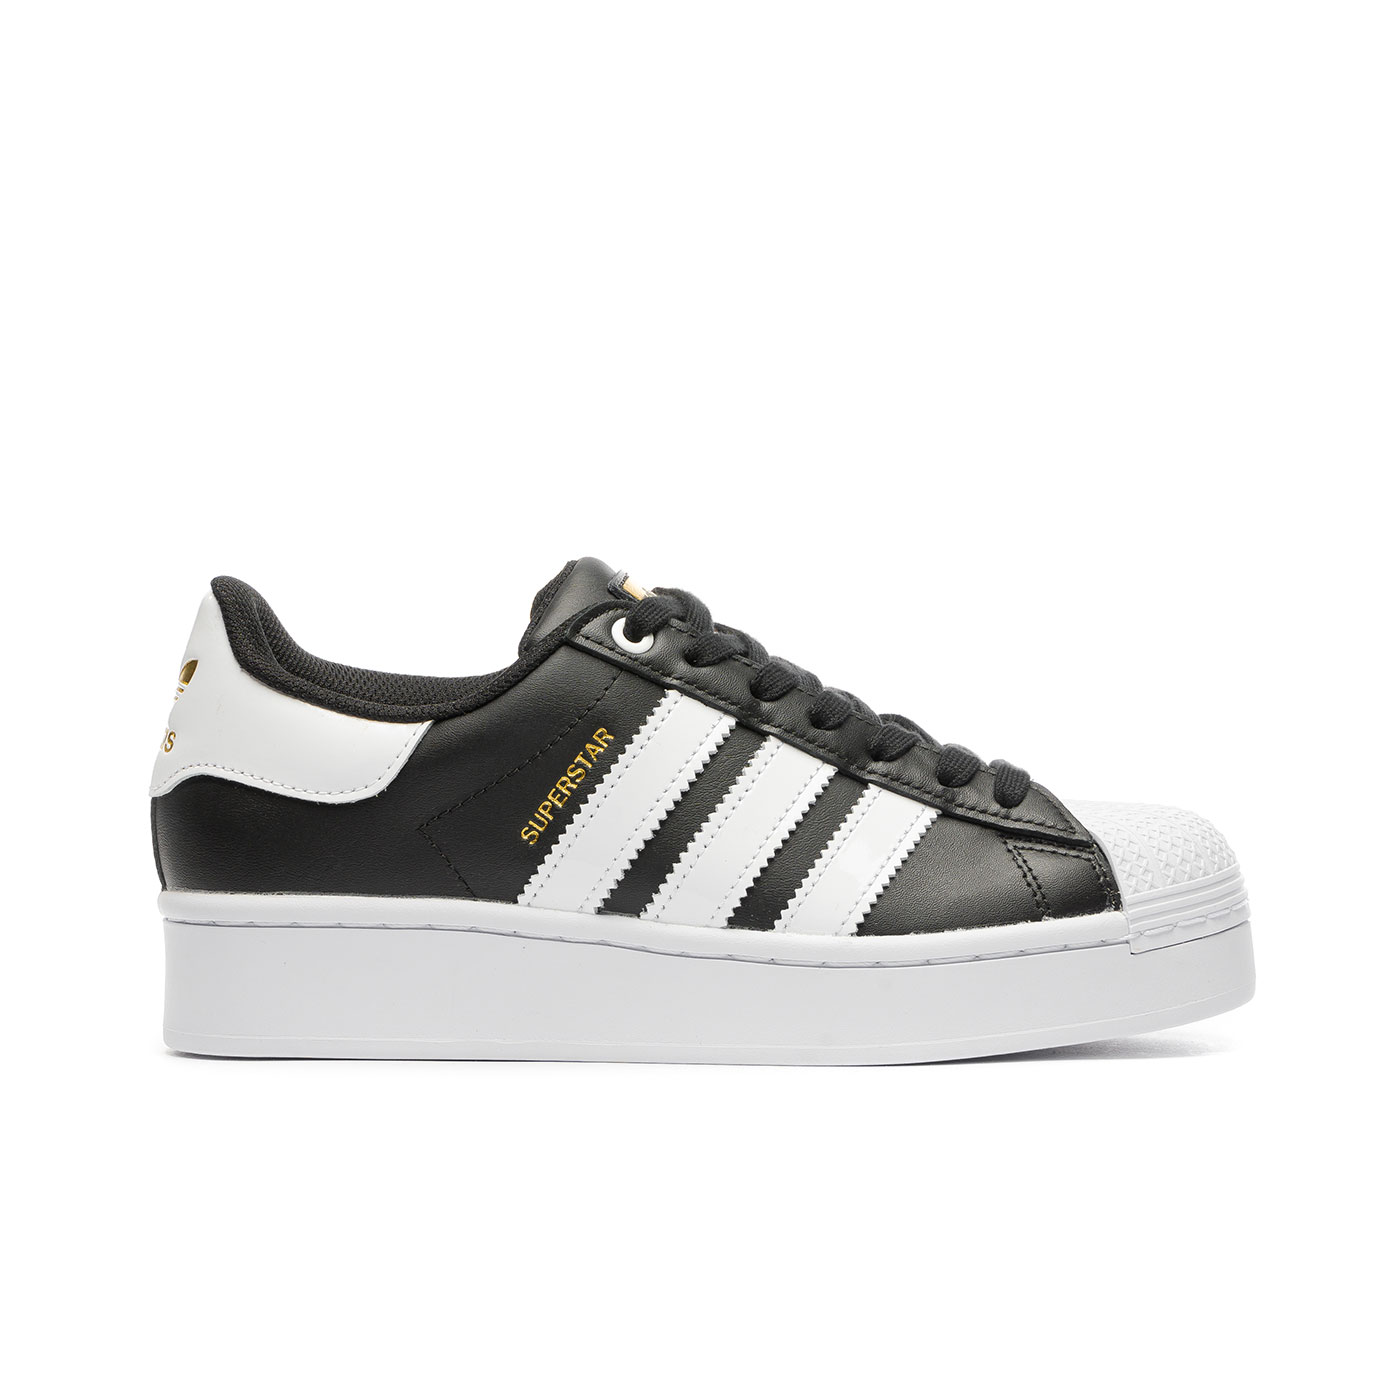 Sneakers ADIDAS Superstar Bold W Black for Woman | FV3335 | XTREME.PT